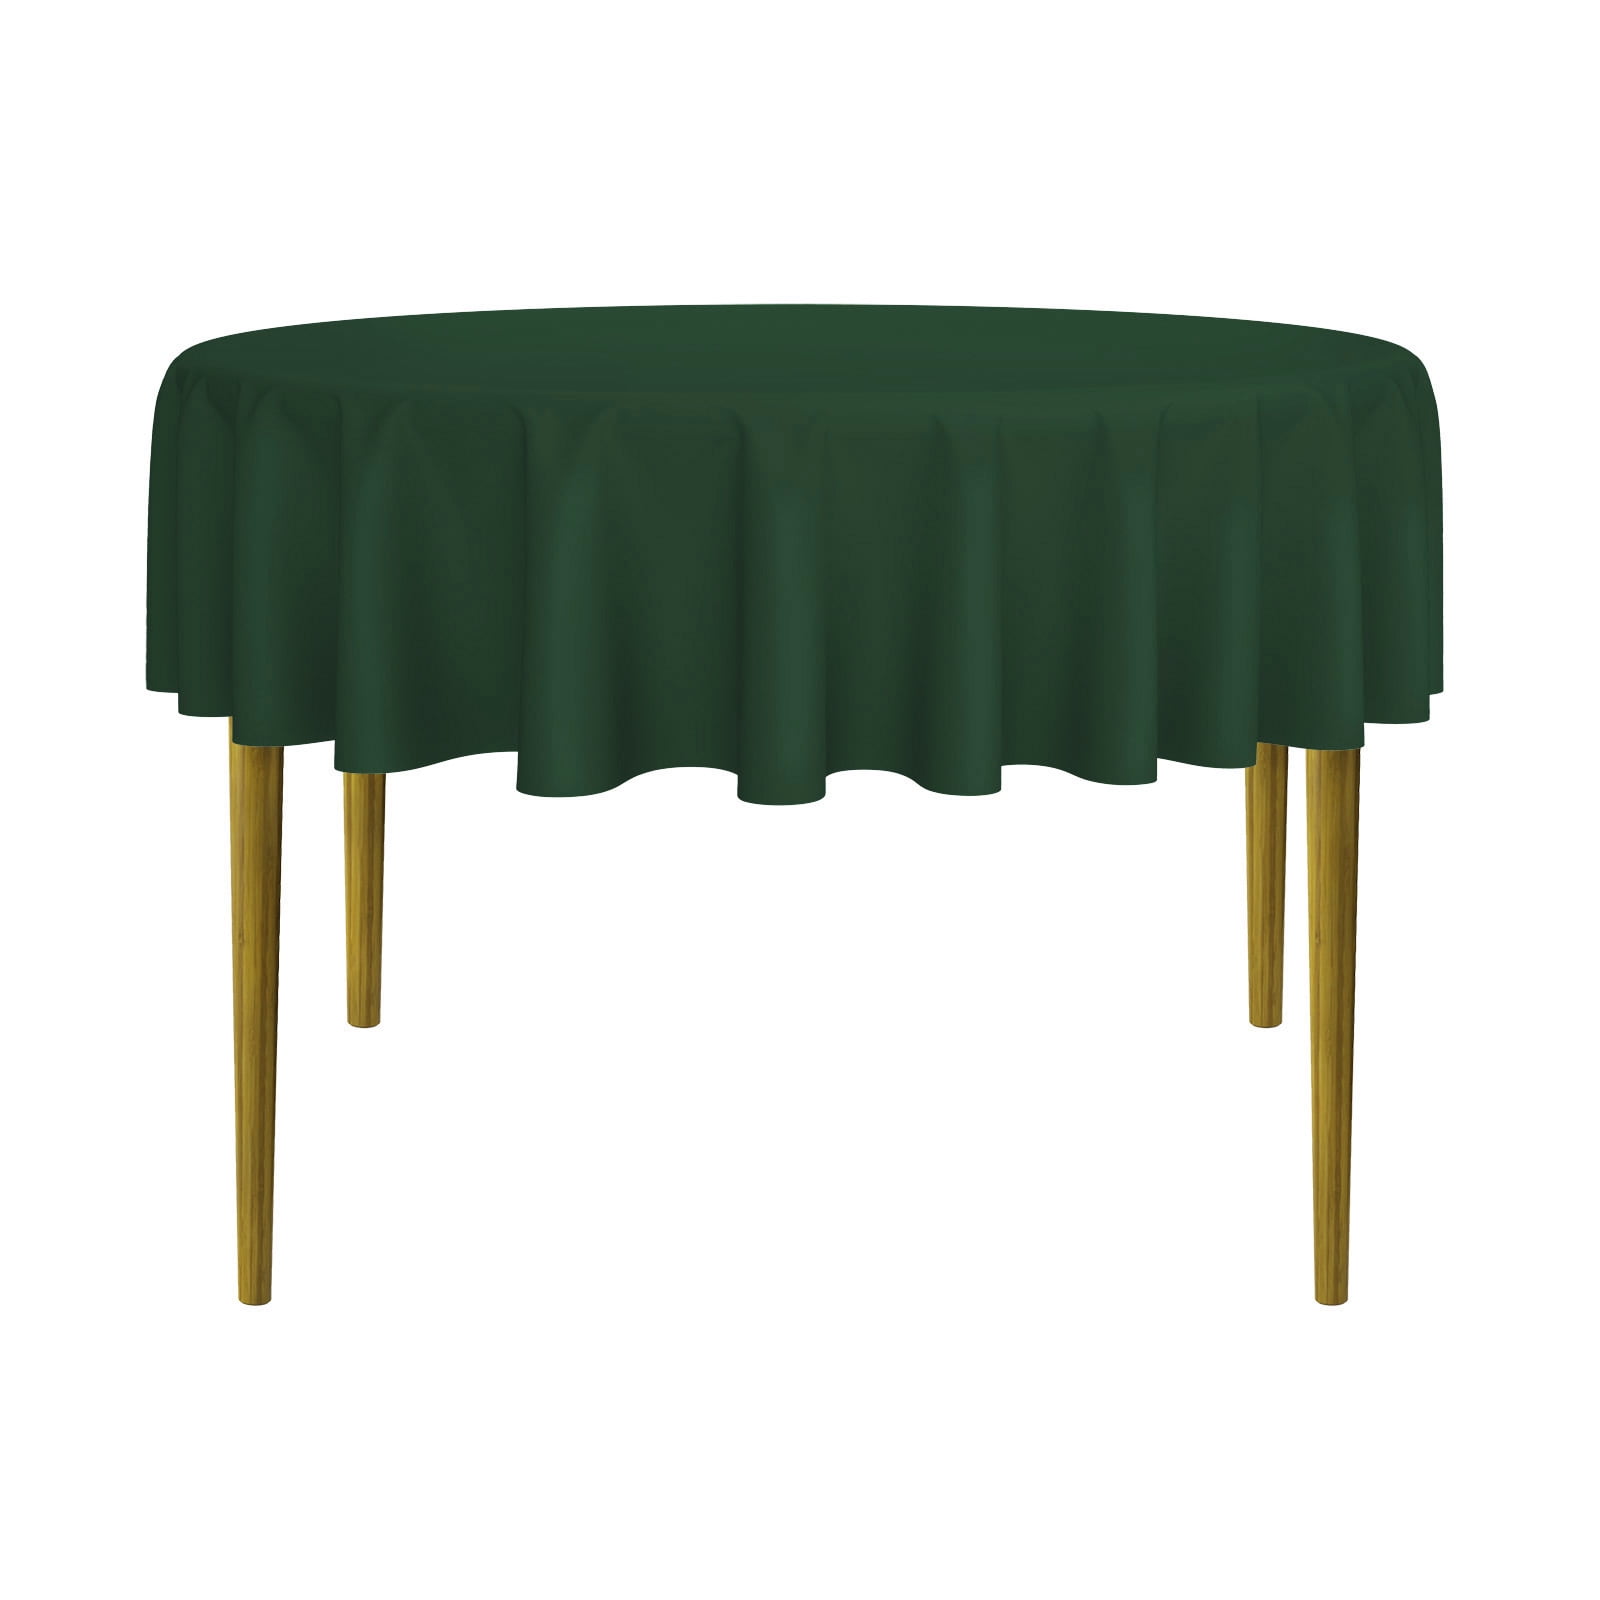 Waterproof Fabric Minel Table Cloth Rectangle Green 52x70 